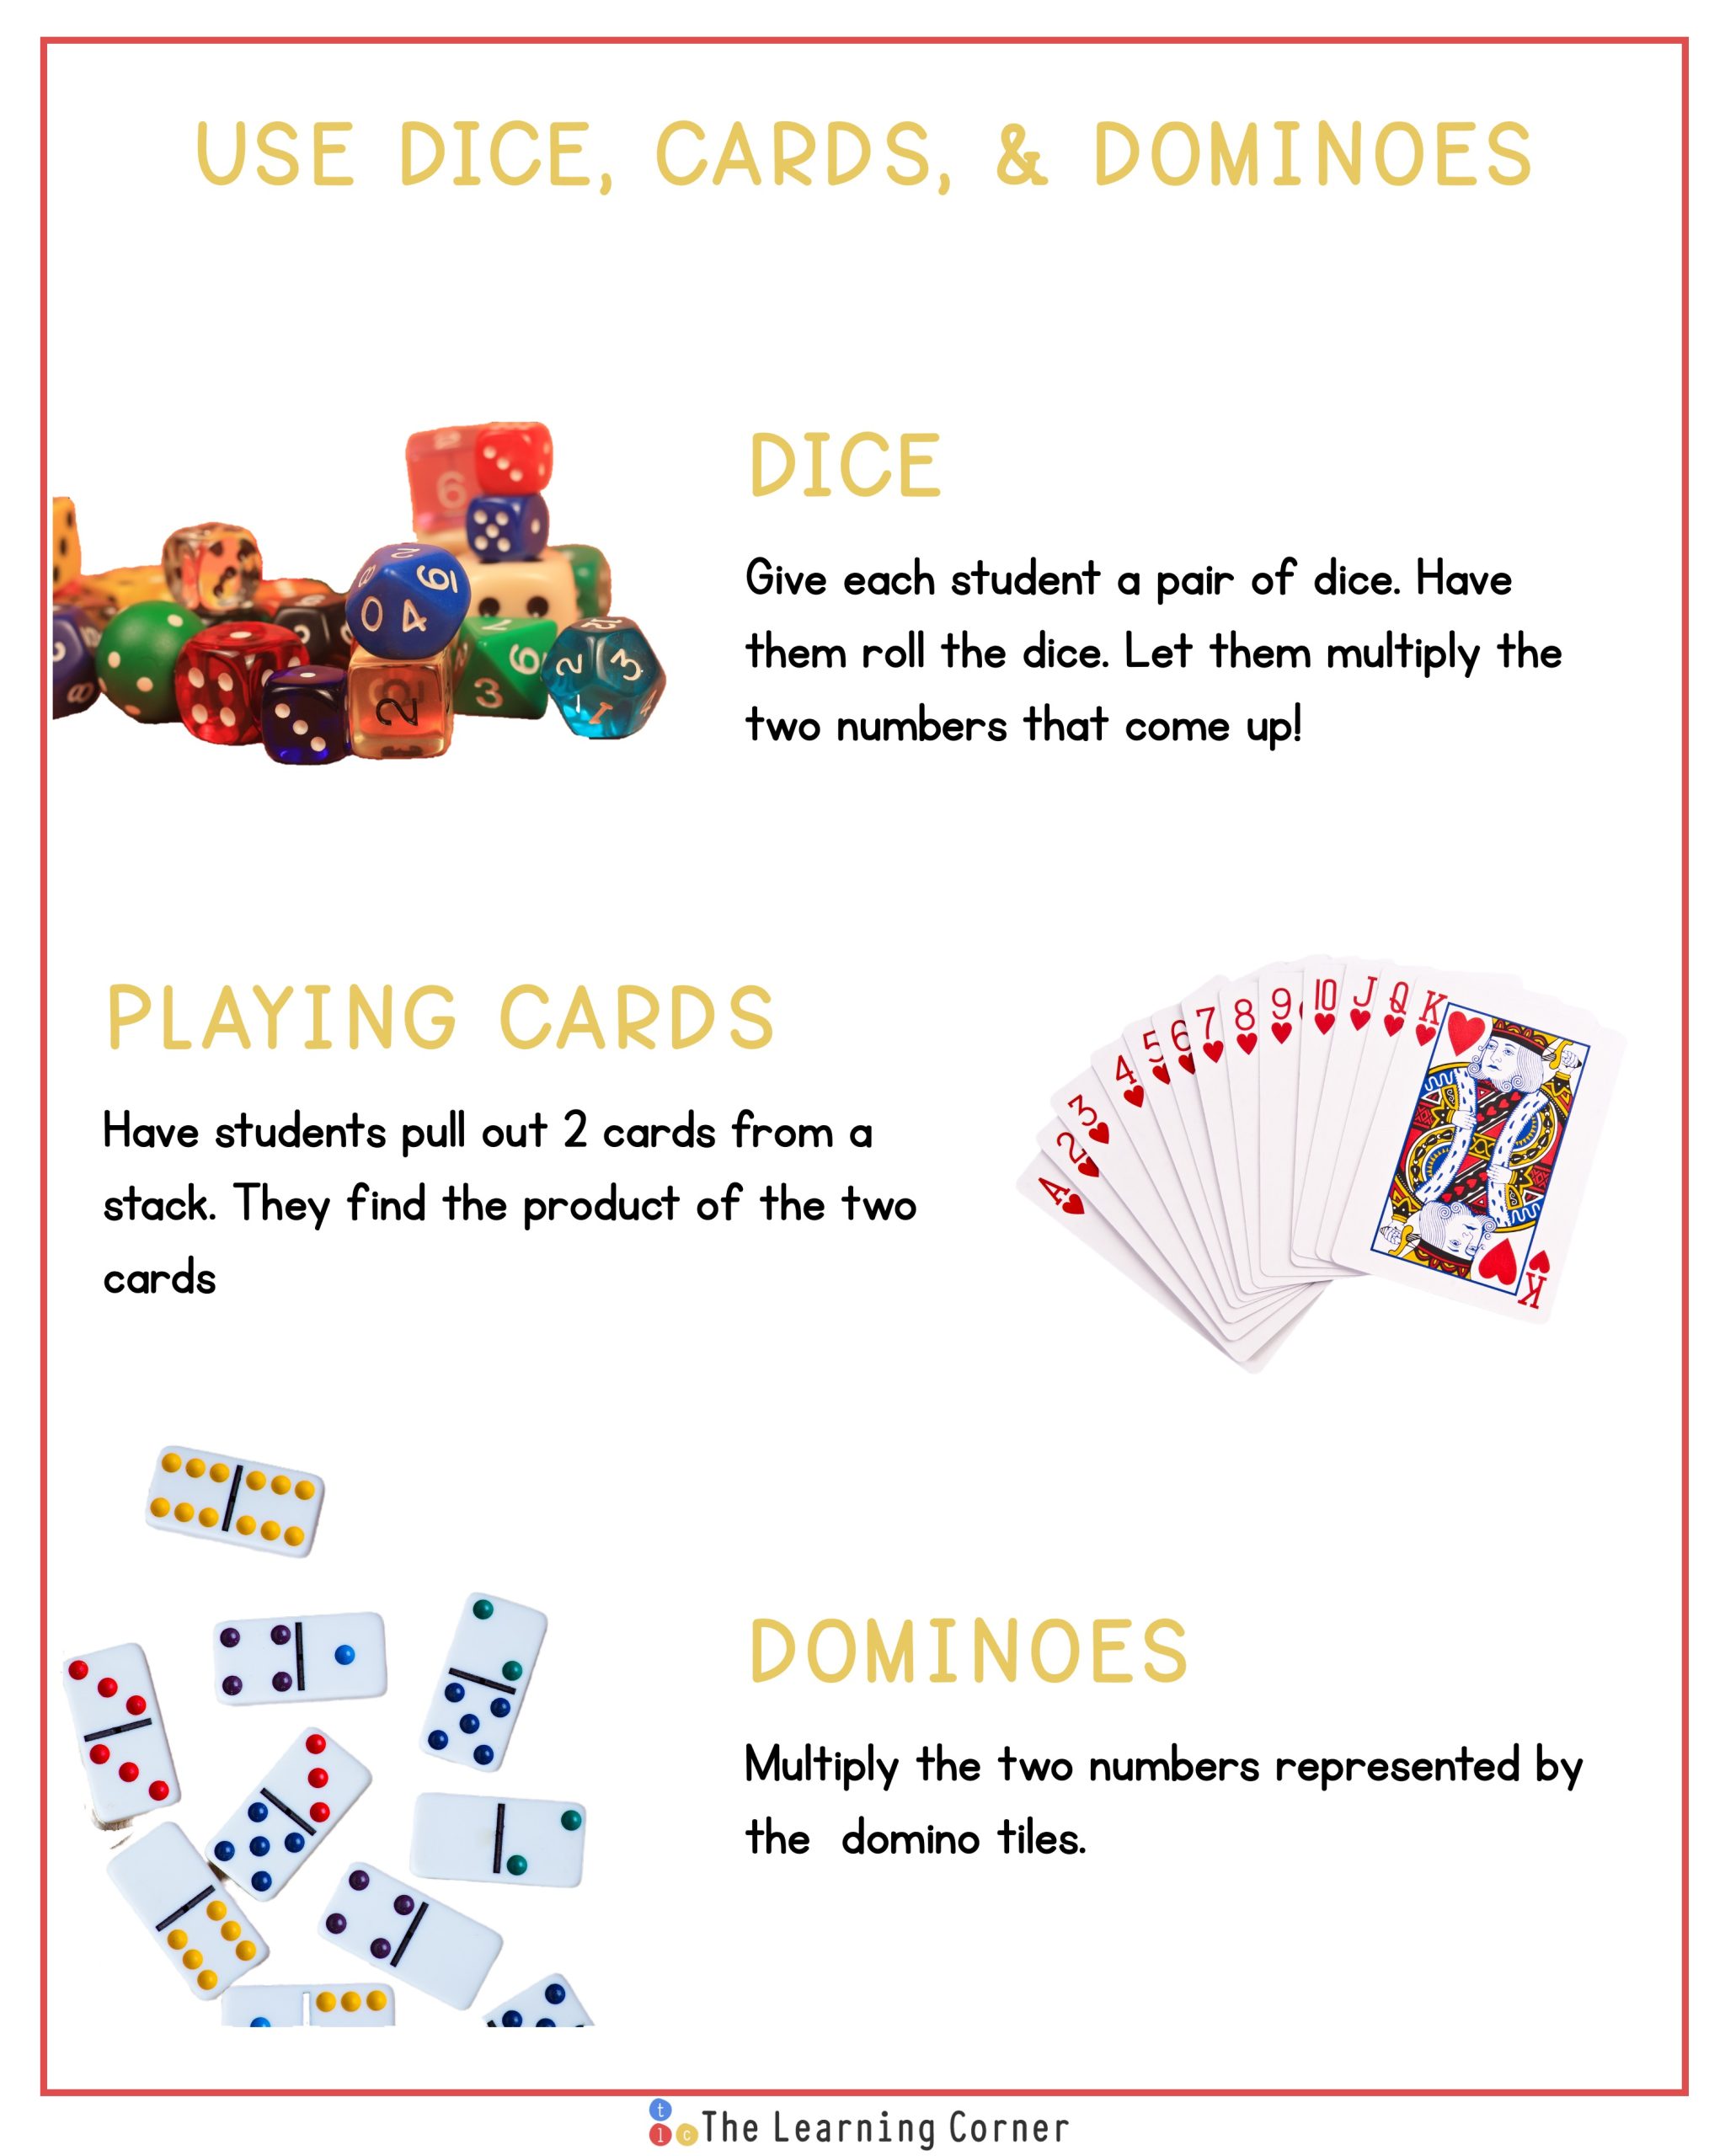 Multiplication fact dice cards and dominoes